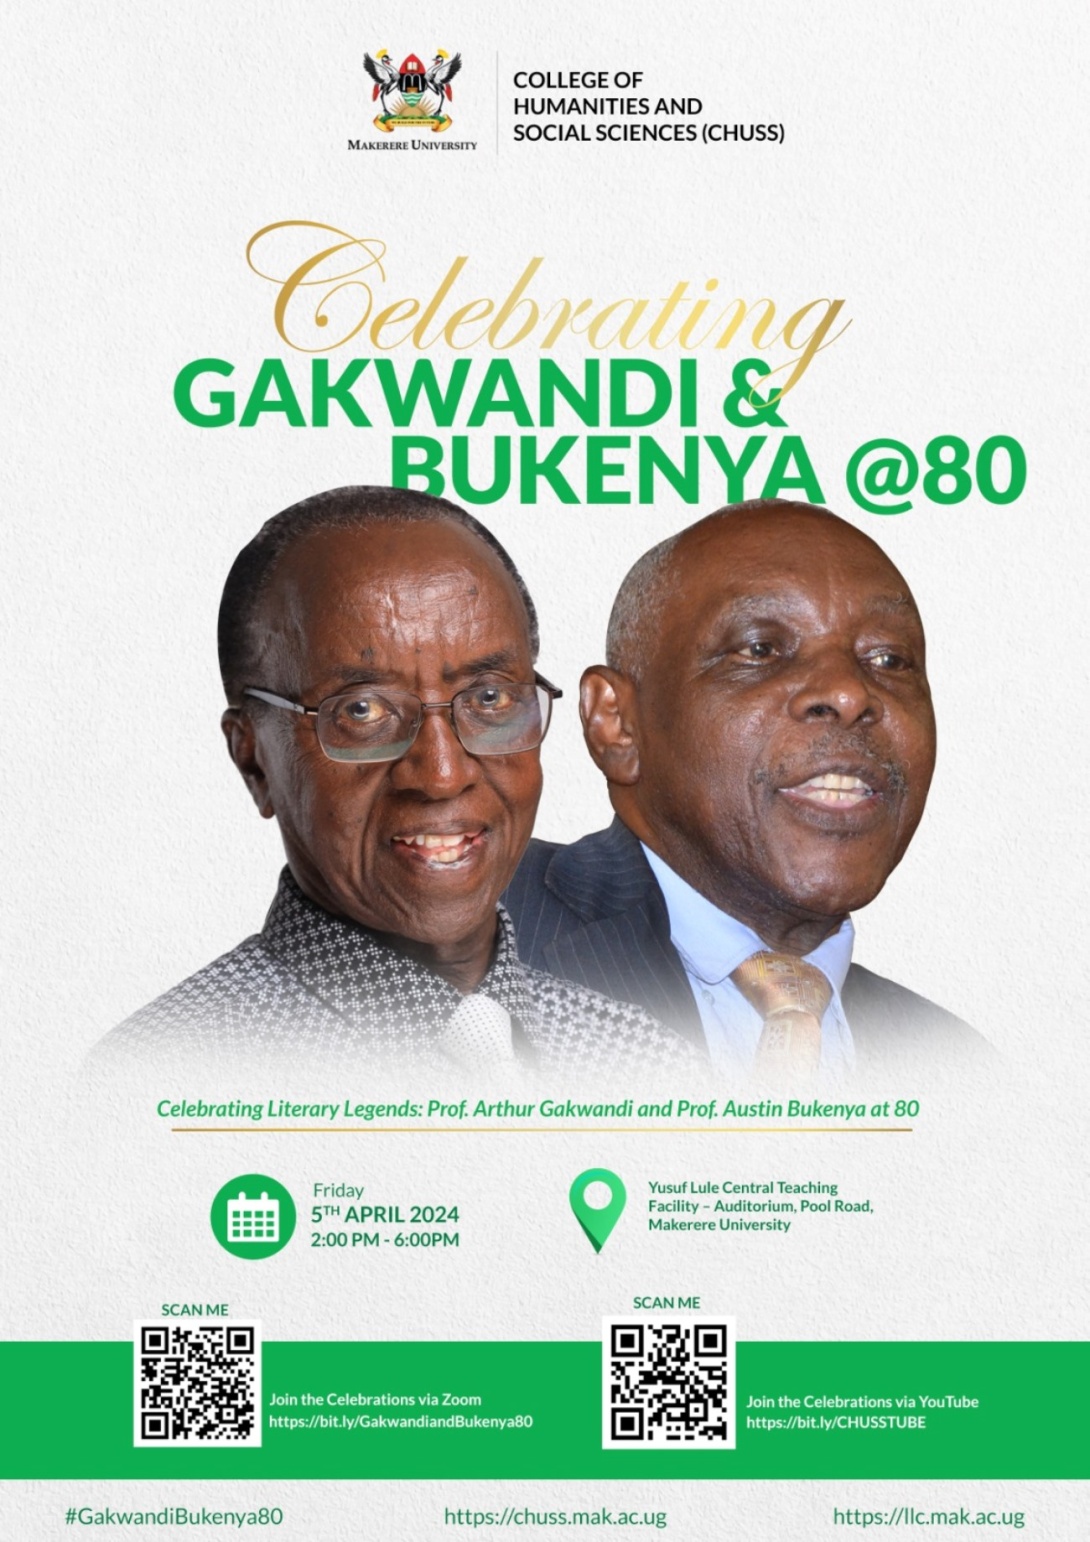 Department of Literature, School of Languages Literature and Communication, College of Humanities and Social Sciences (CHUSS), Celebrating Literary Legends: Gakwandi and Bukenya@80, 5th April 2024 from 2:00 to 6:00 PM EAT, The Auditorium, Yusuf Lule Central Teaching Facility, Makerere University, Kampala Uganda, East Africa.